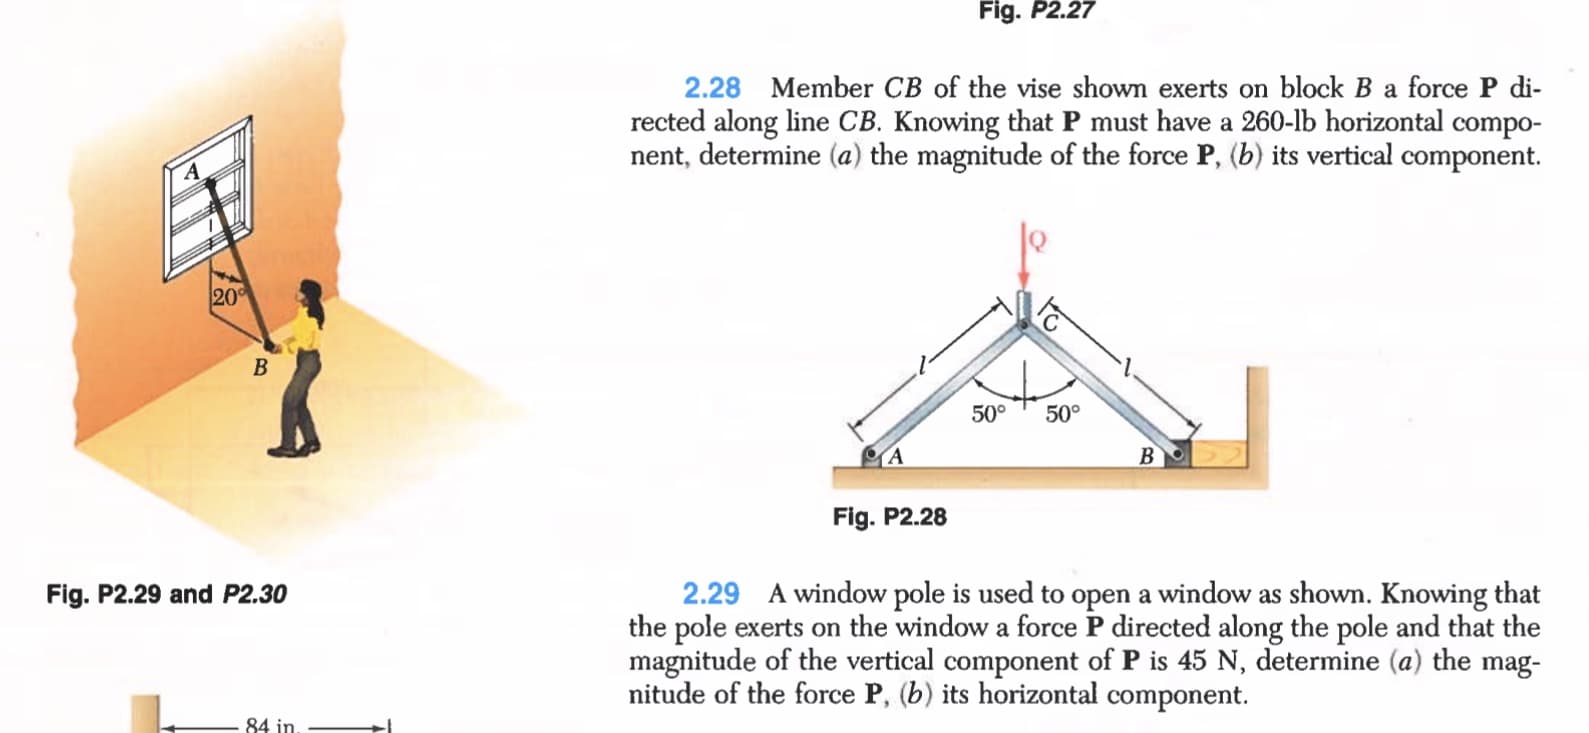 2.28 Member CB of the vise shown exerts on block B a force P di-
rected along line CB. Knowing that P must have a 260-lb horizontal compo-
nent, determine (a) the magnitude of the force P, (b) its vertical component.
20
В
50°
50°
Fig. P2.28
2.29 A window pole is used to open a window as shown. Knowing that
the pole exerts on the window a force P directed along the pole and that the
magnitude of the vertical component of P is 45 N, determine (a) the mag-
nitude of the force P, (b) its horizontal component.
Fig. P2.29 and P2.30
